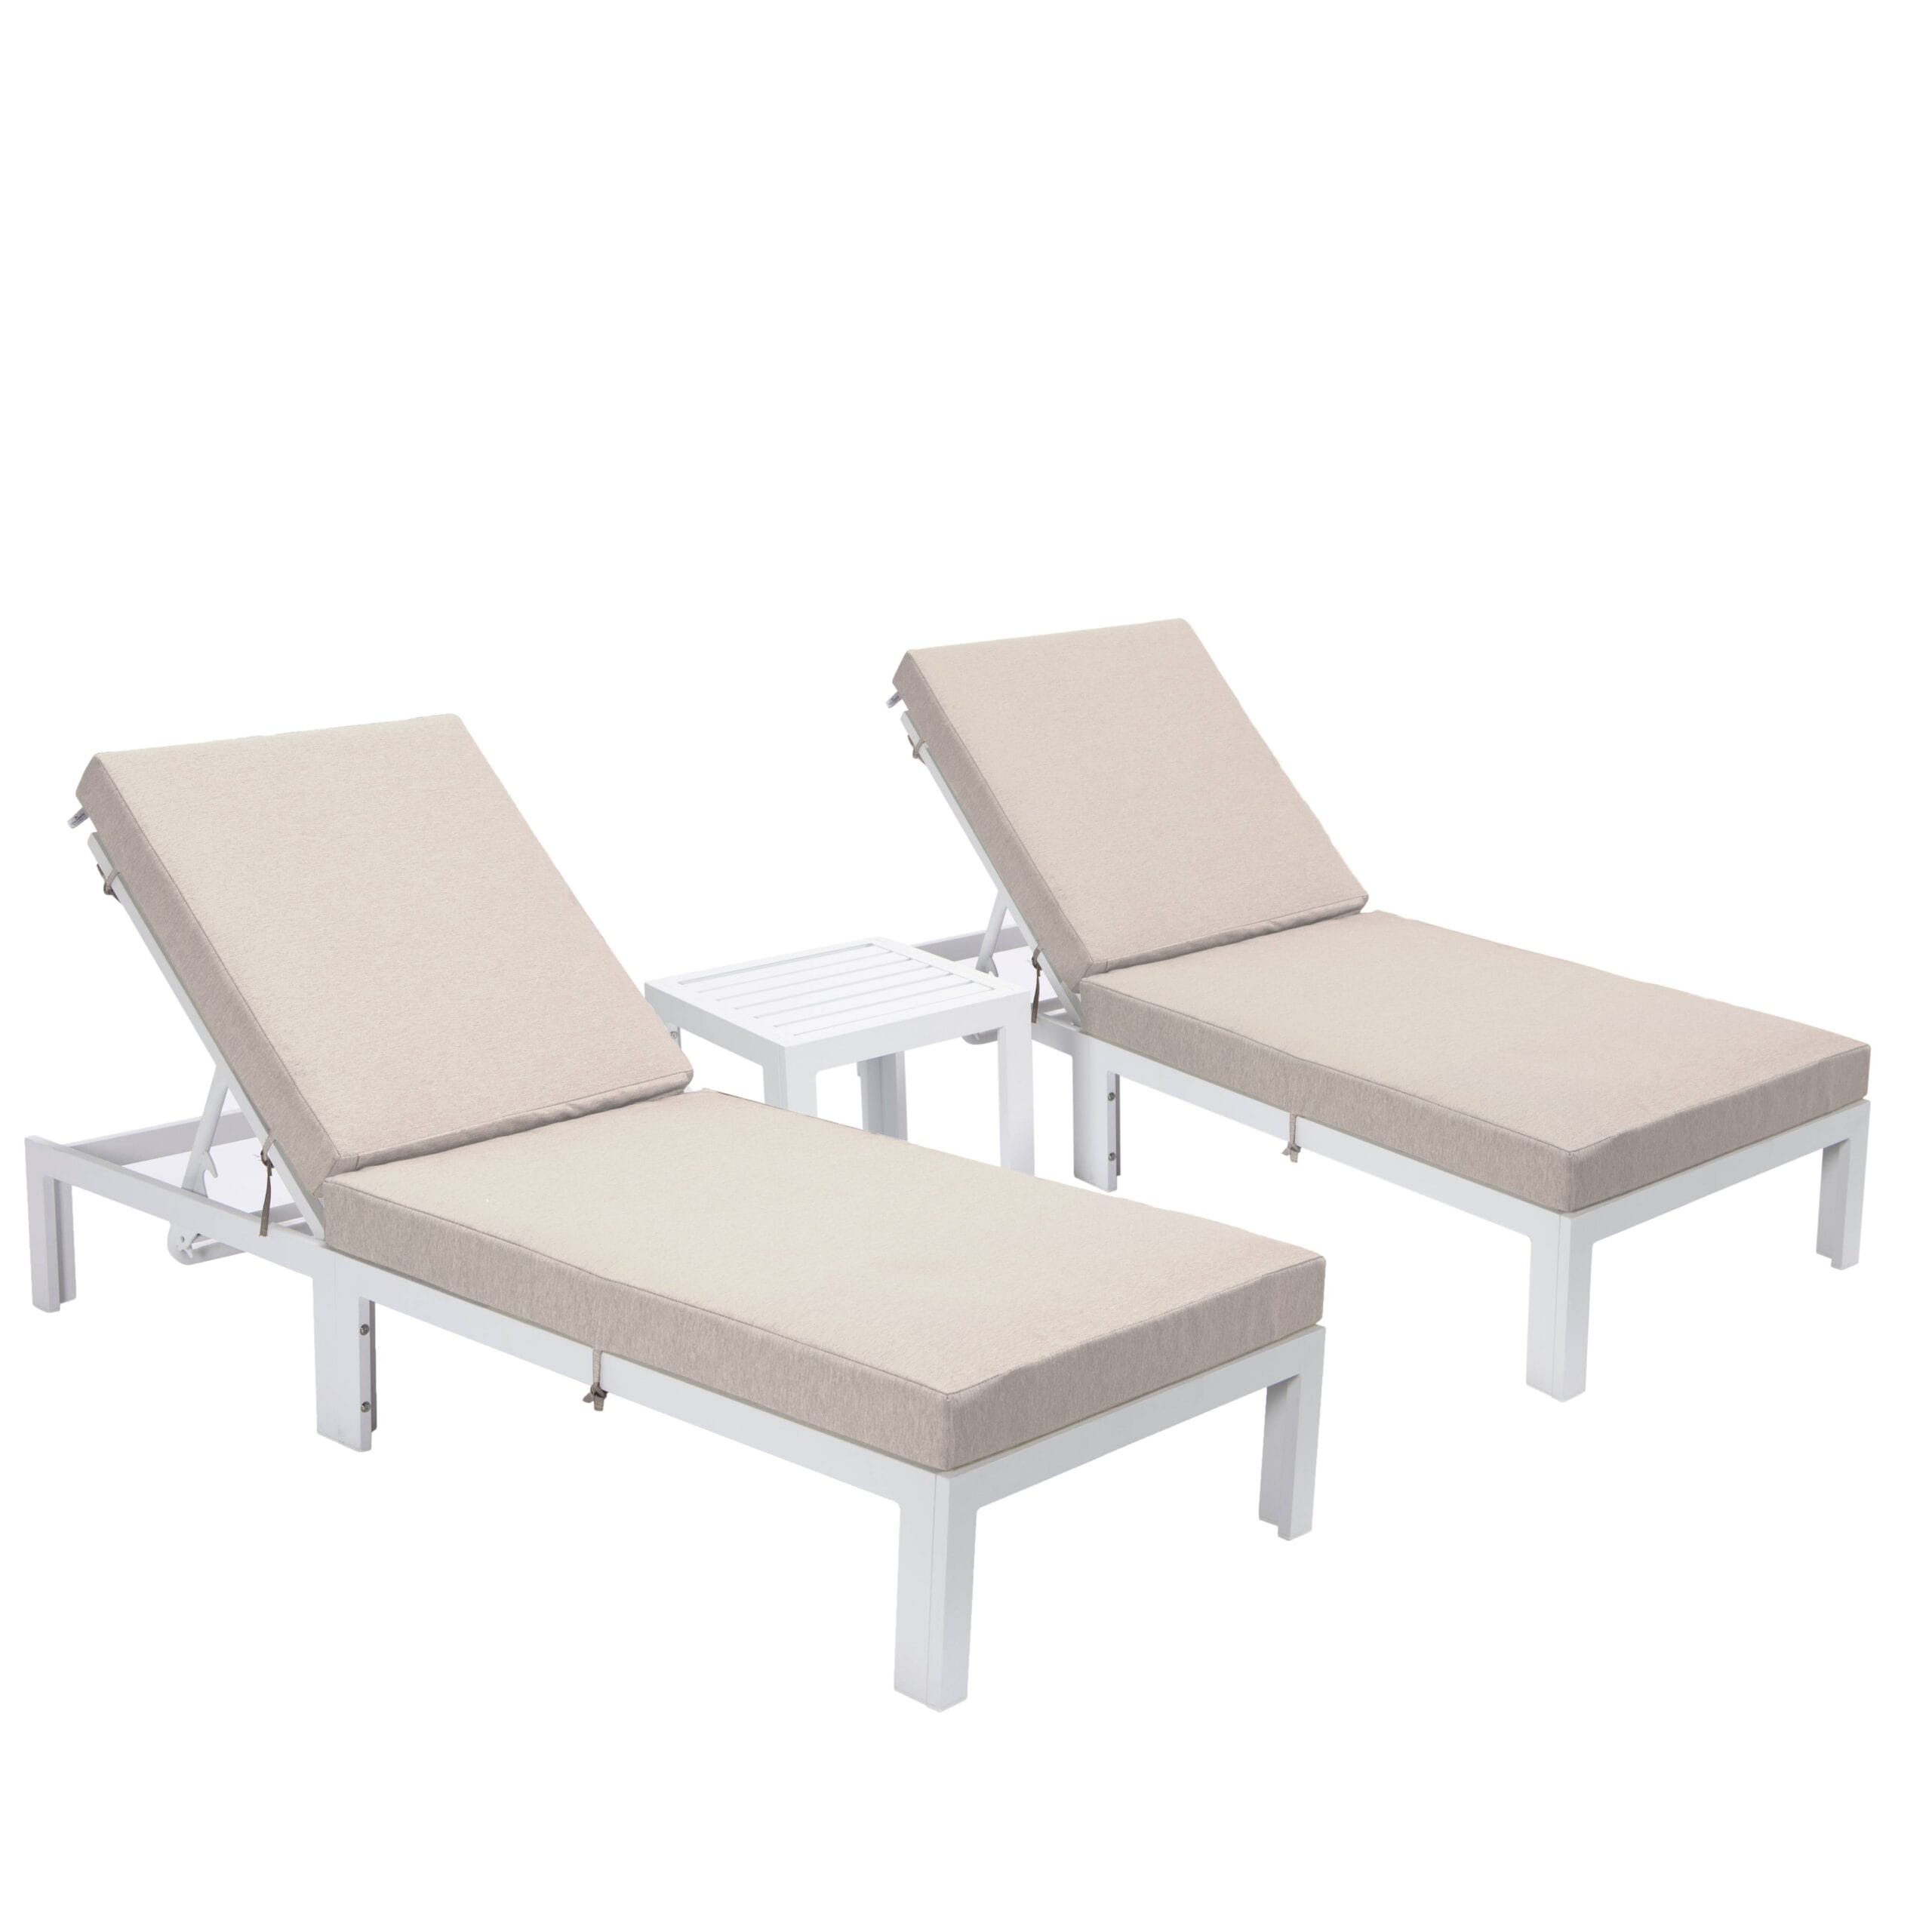 Leisuremod Chelsea White Chaise Lounge W/ Cushions and Side Table 2 Set